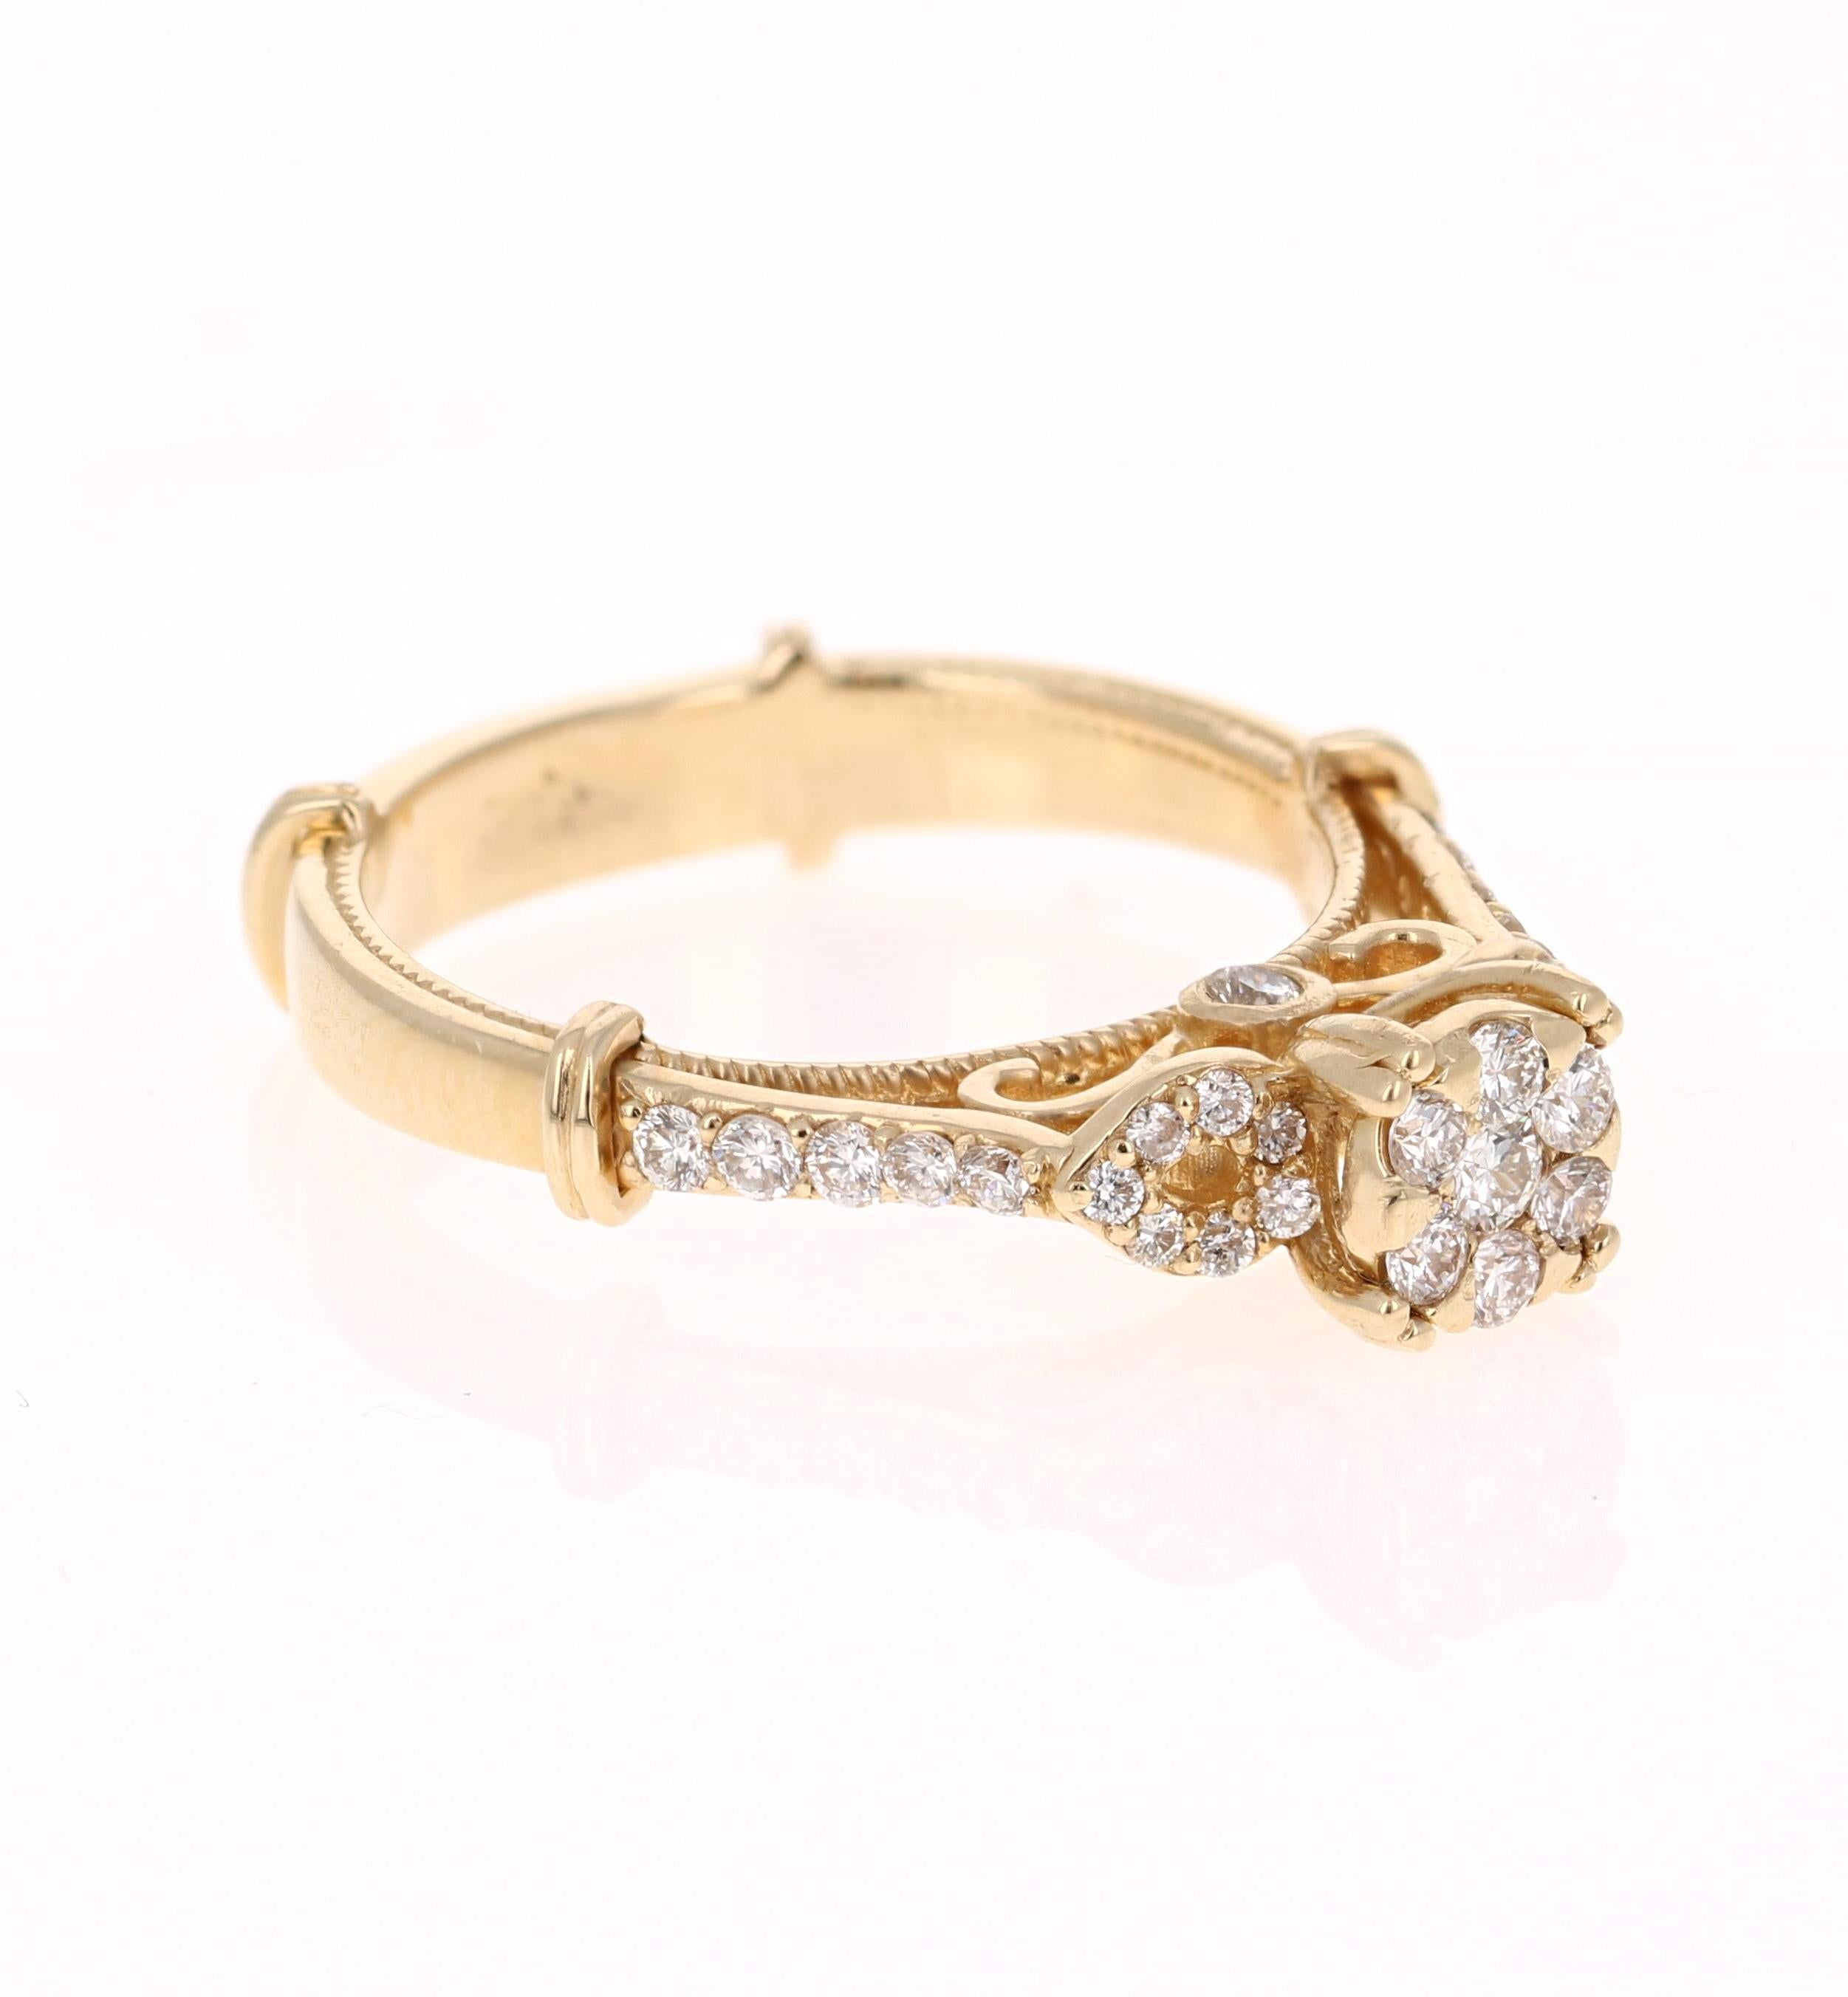 This unique ring has 66 Round Cut Diamonds that weigh 0.50 Carats. 

It is beautifully set in 14 Karat Yellow Gold and weighs approximately 4.3 grams

The ring is a size 6 1/2 and can be re-sized free of charge. 

